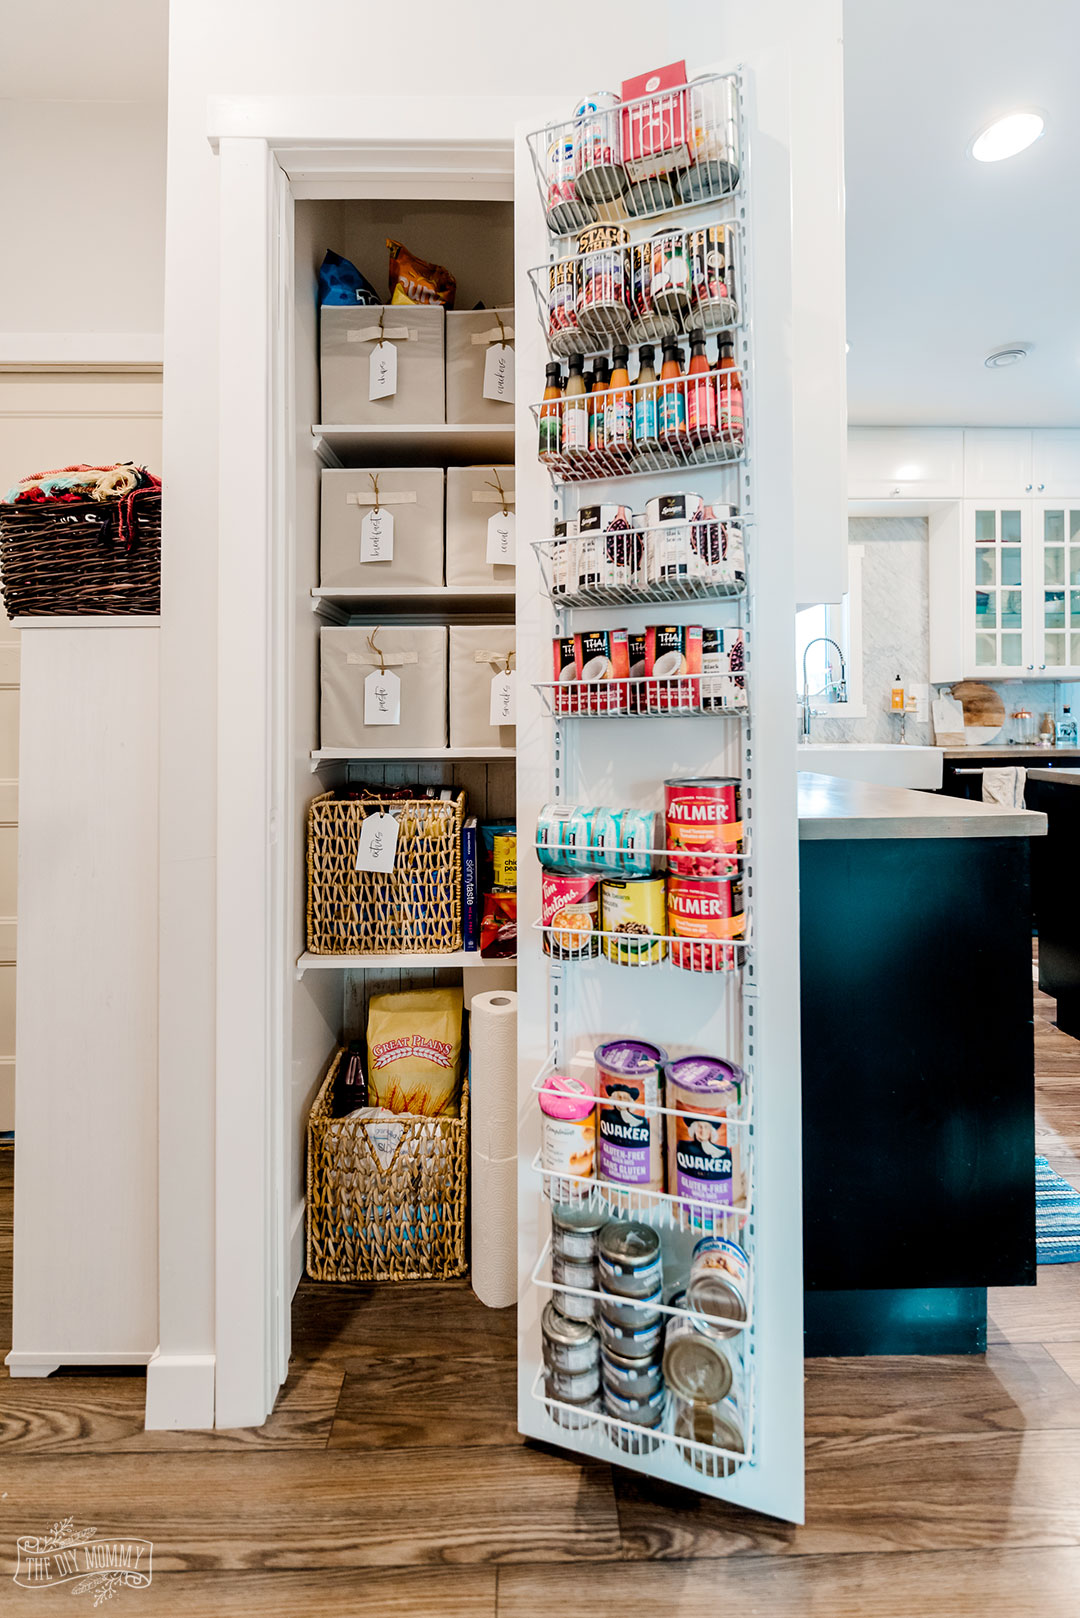 How to turn a tiny, useless closet into a useful, organized small pantry.